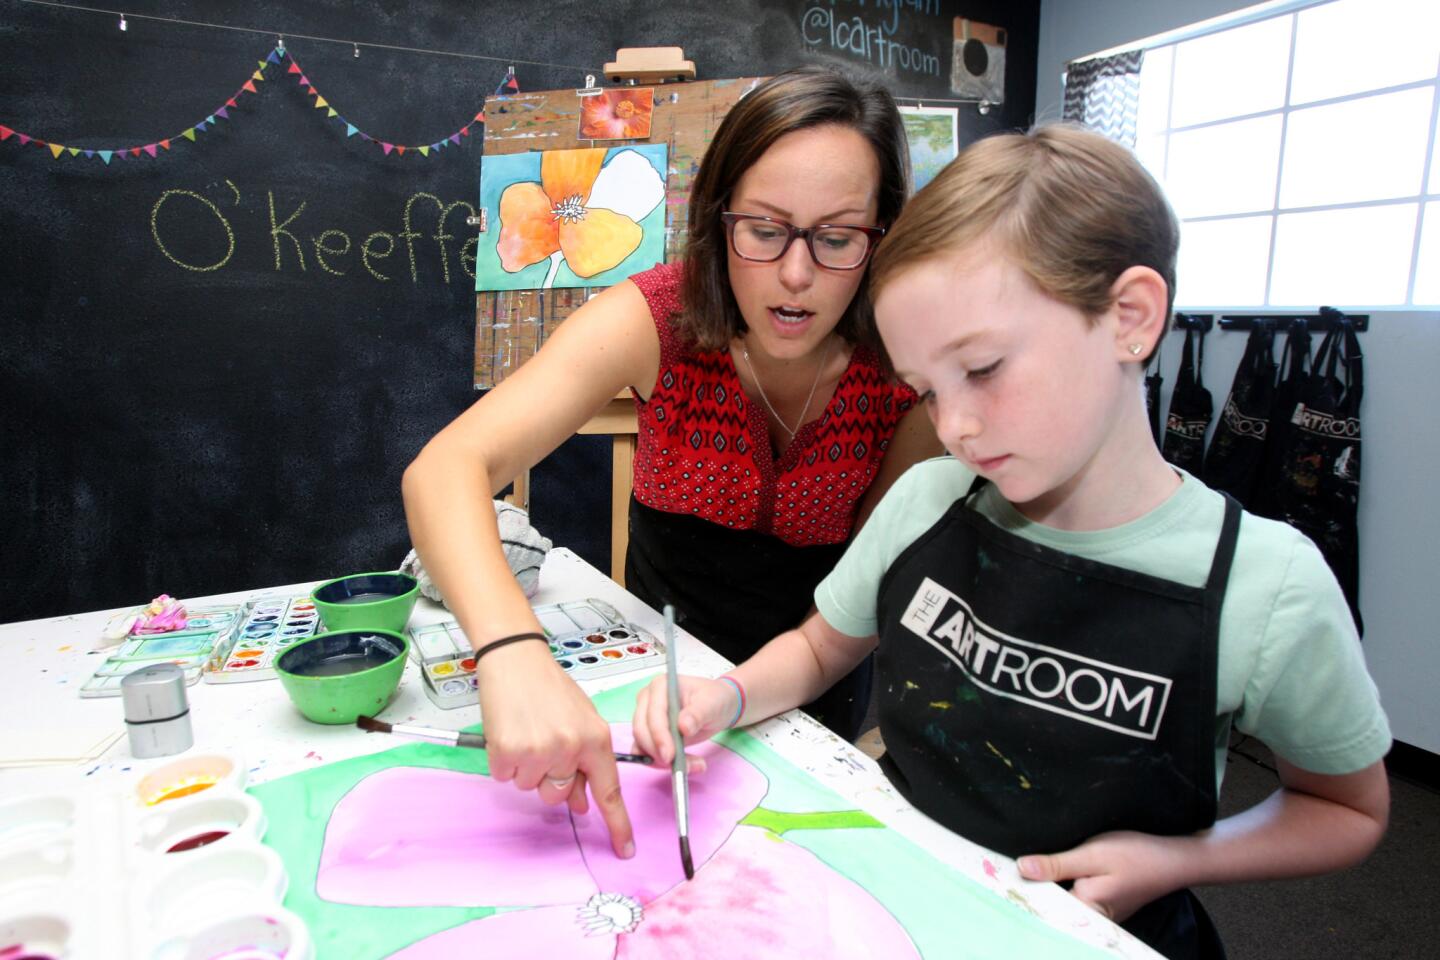 The Art Room in La Crescenta offers variety of art classes for Summer